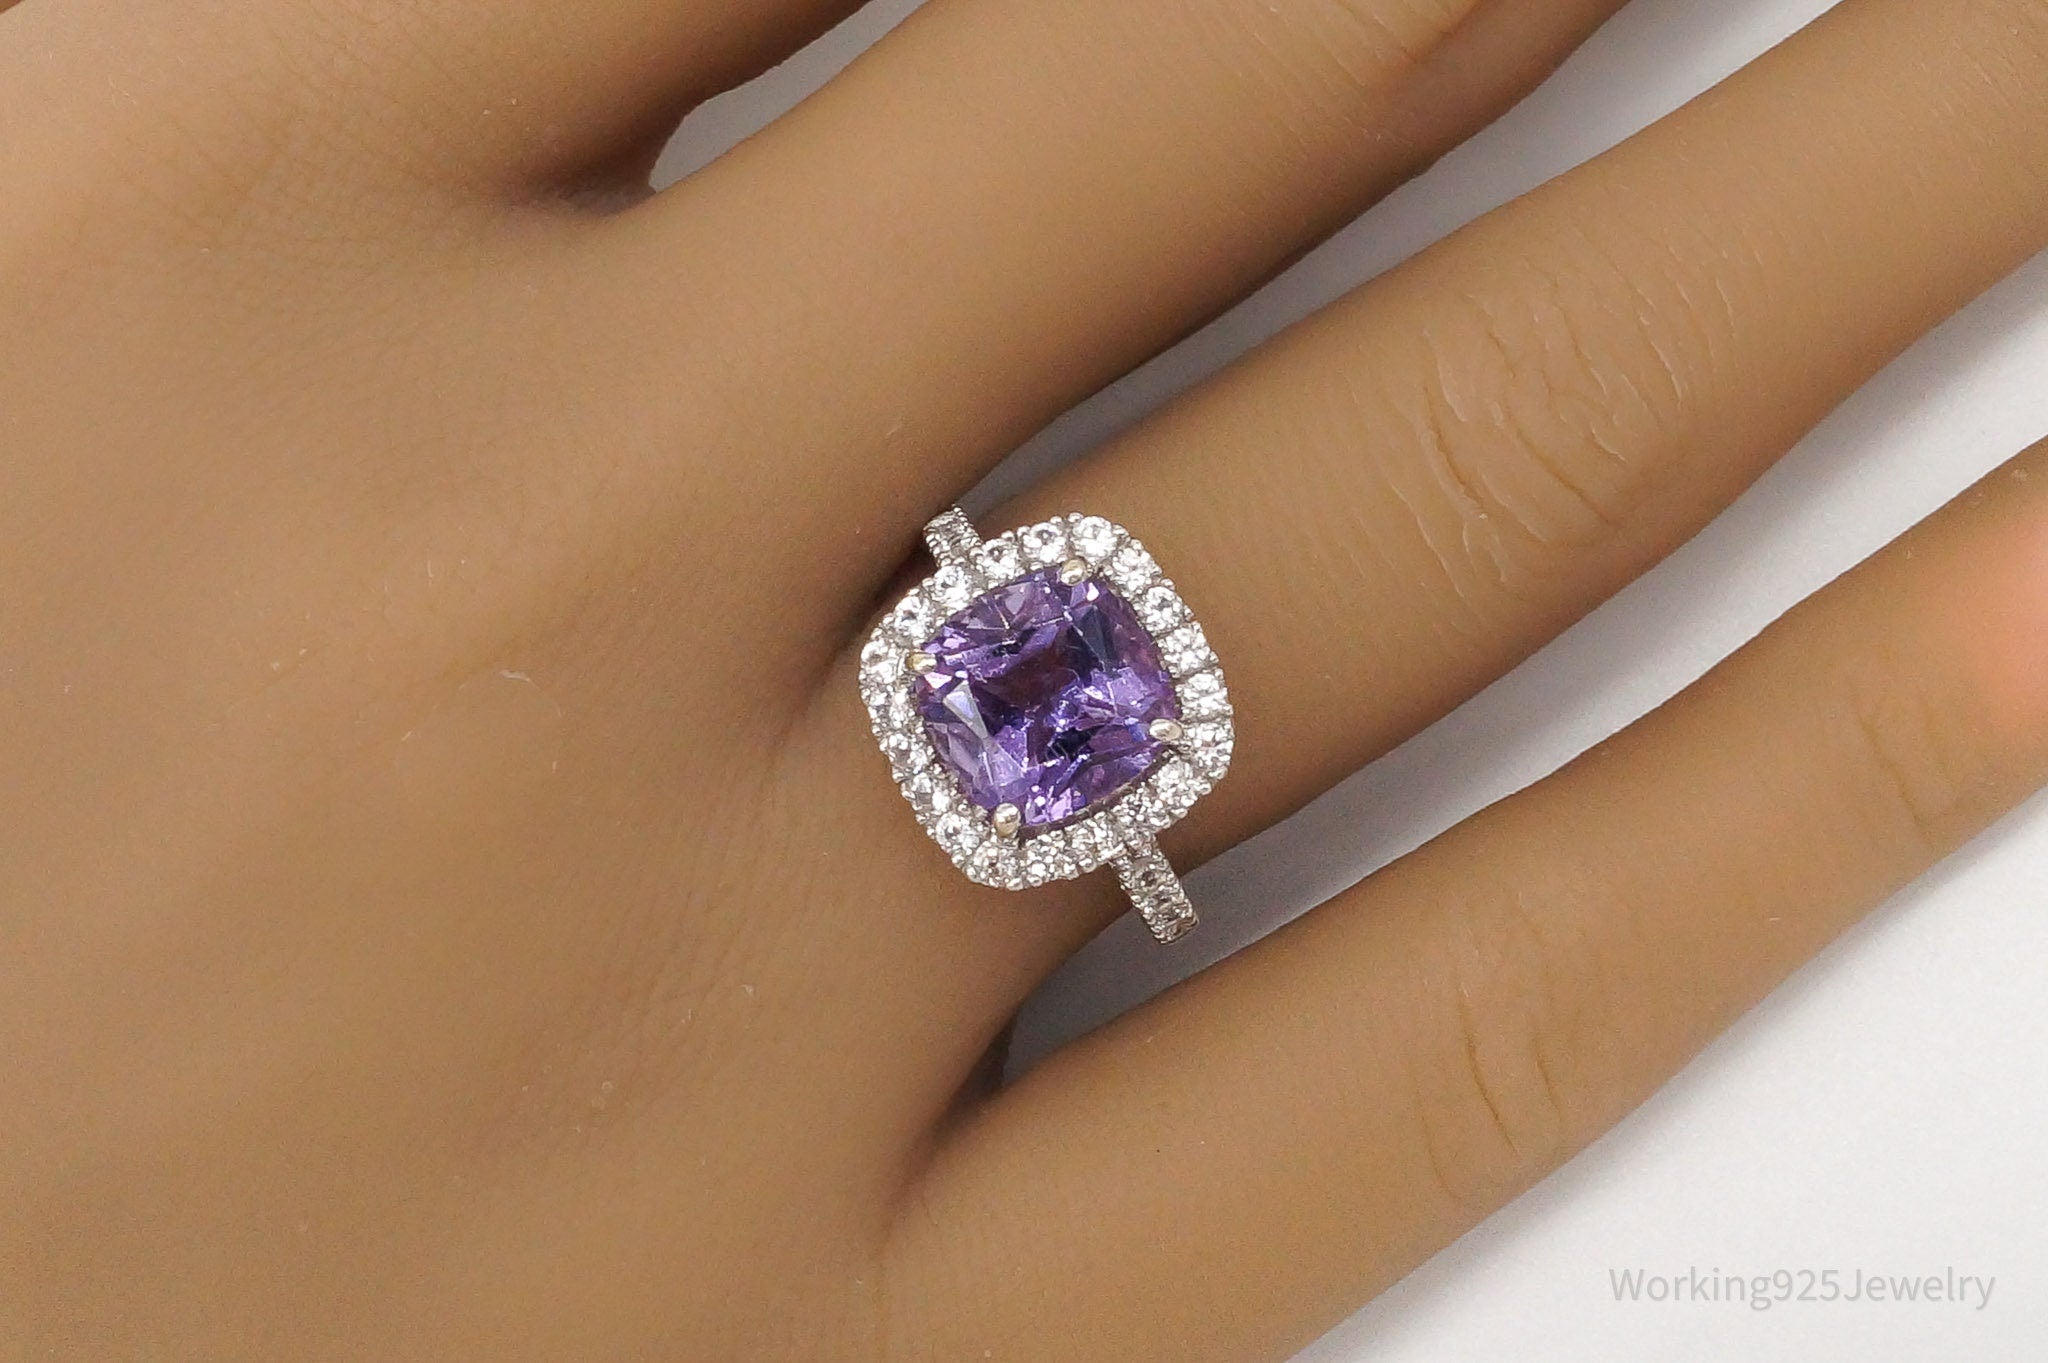 Vintage Amethyst Cubic Zirconia Sterling Silver Ring - Size 6.75